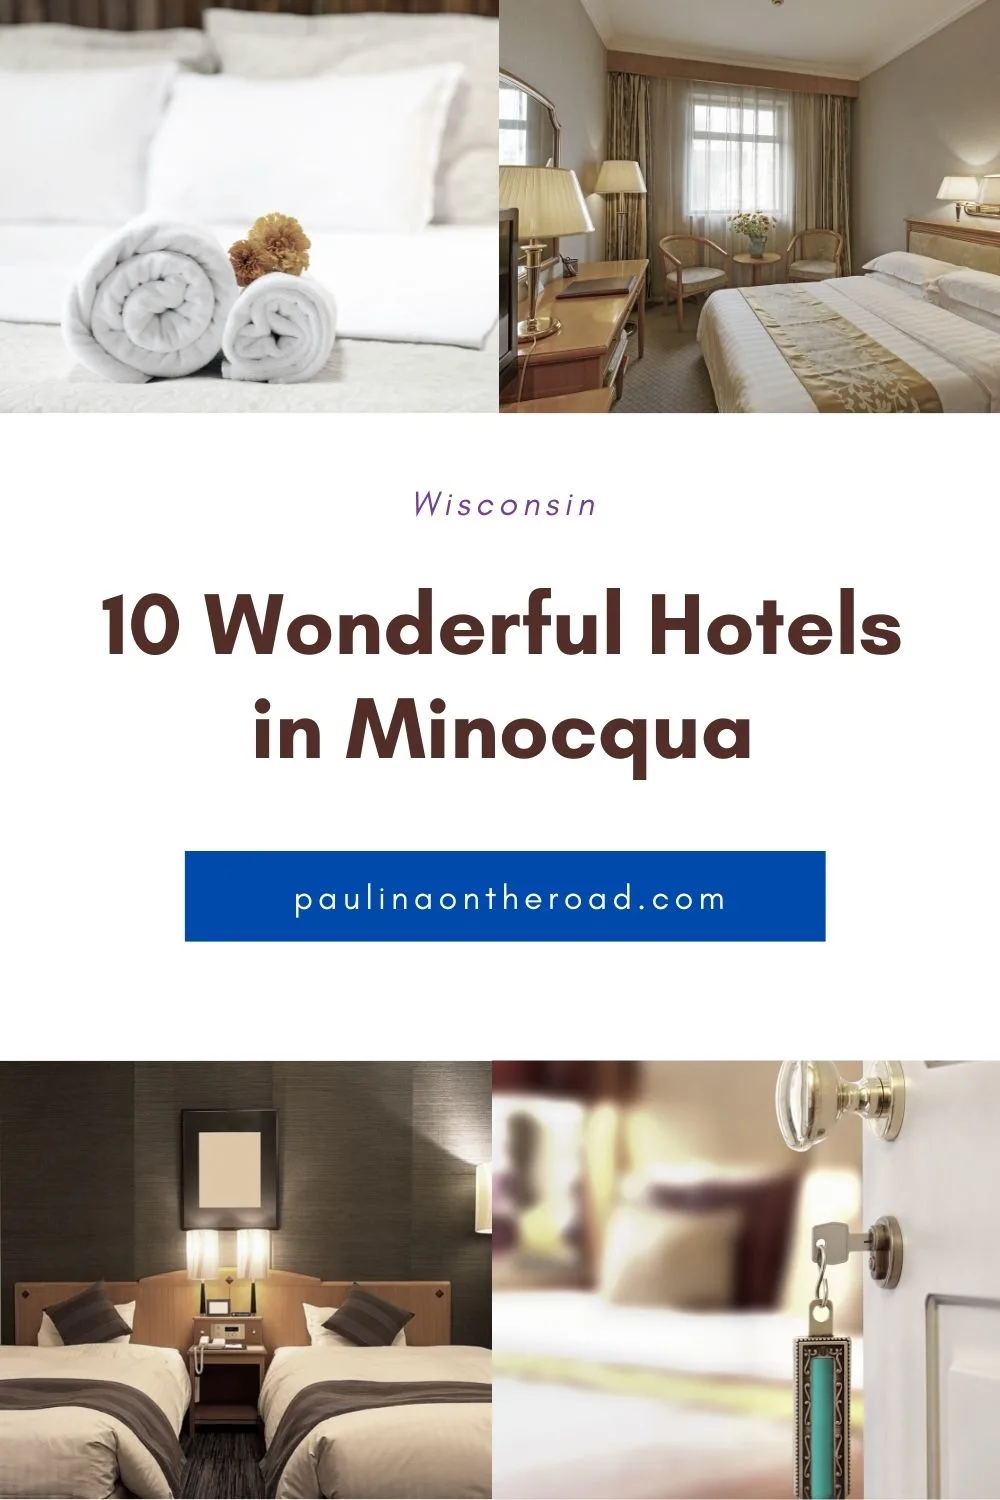 Planning a trip to Minocqua, Wisconsin, and looking for the best Minocqua lodging options? Luckily, there are a lot of great places to stay in Minocqua from budget motels to high-end resorts. Whether you are looking for a romantic getaway or family trip, Minocqua, this guide to the best hotels in Minocqua, WI, has places for every budget or type of traveler. #Minocqua #Wisconsin #MinocquaWisconsin #Hotels #Resorts #Motels #VisitWisconsin #BearskinStateTrail #BeaconsOfMinocqua #WatersOfMinocqua